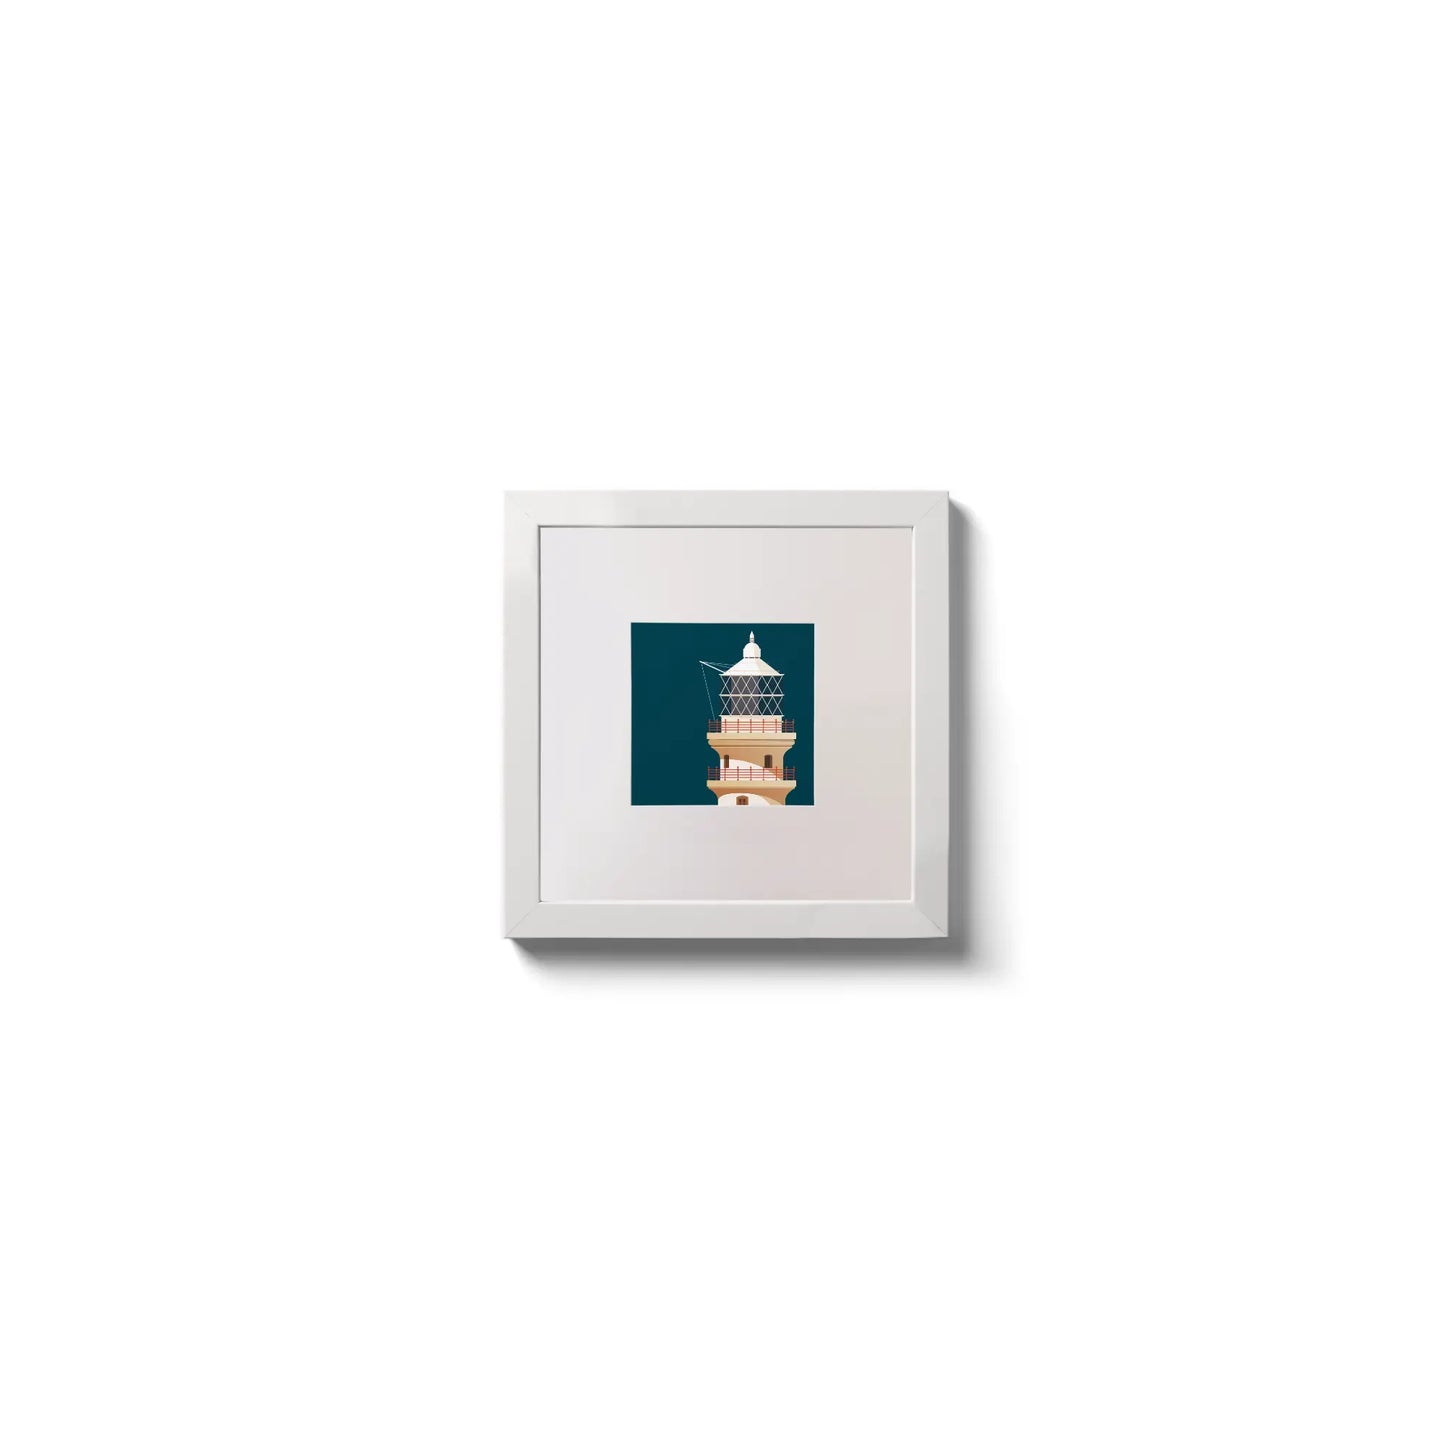 Illustration of Fastnet lighthouse on a midnight blue background,  in a white square frame measuring 10x10cm.